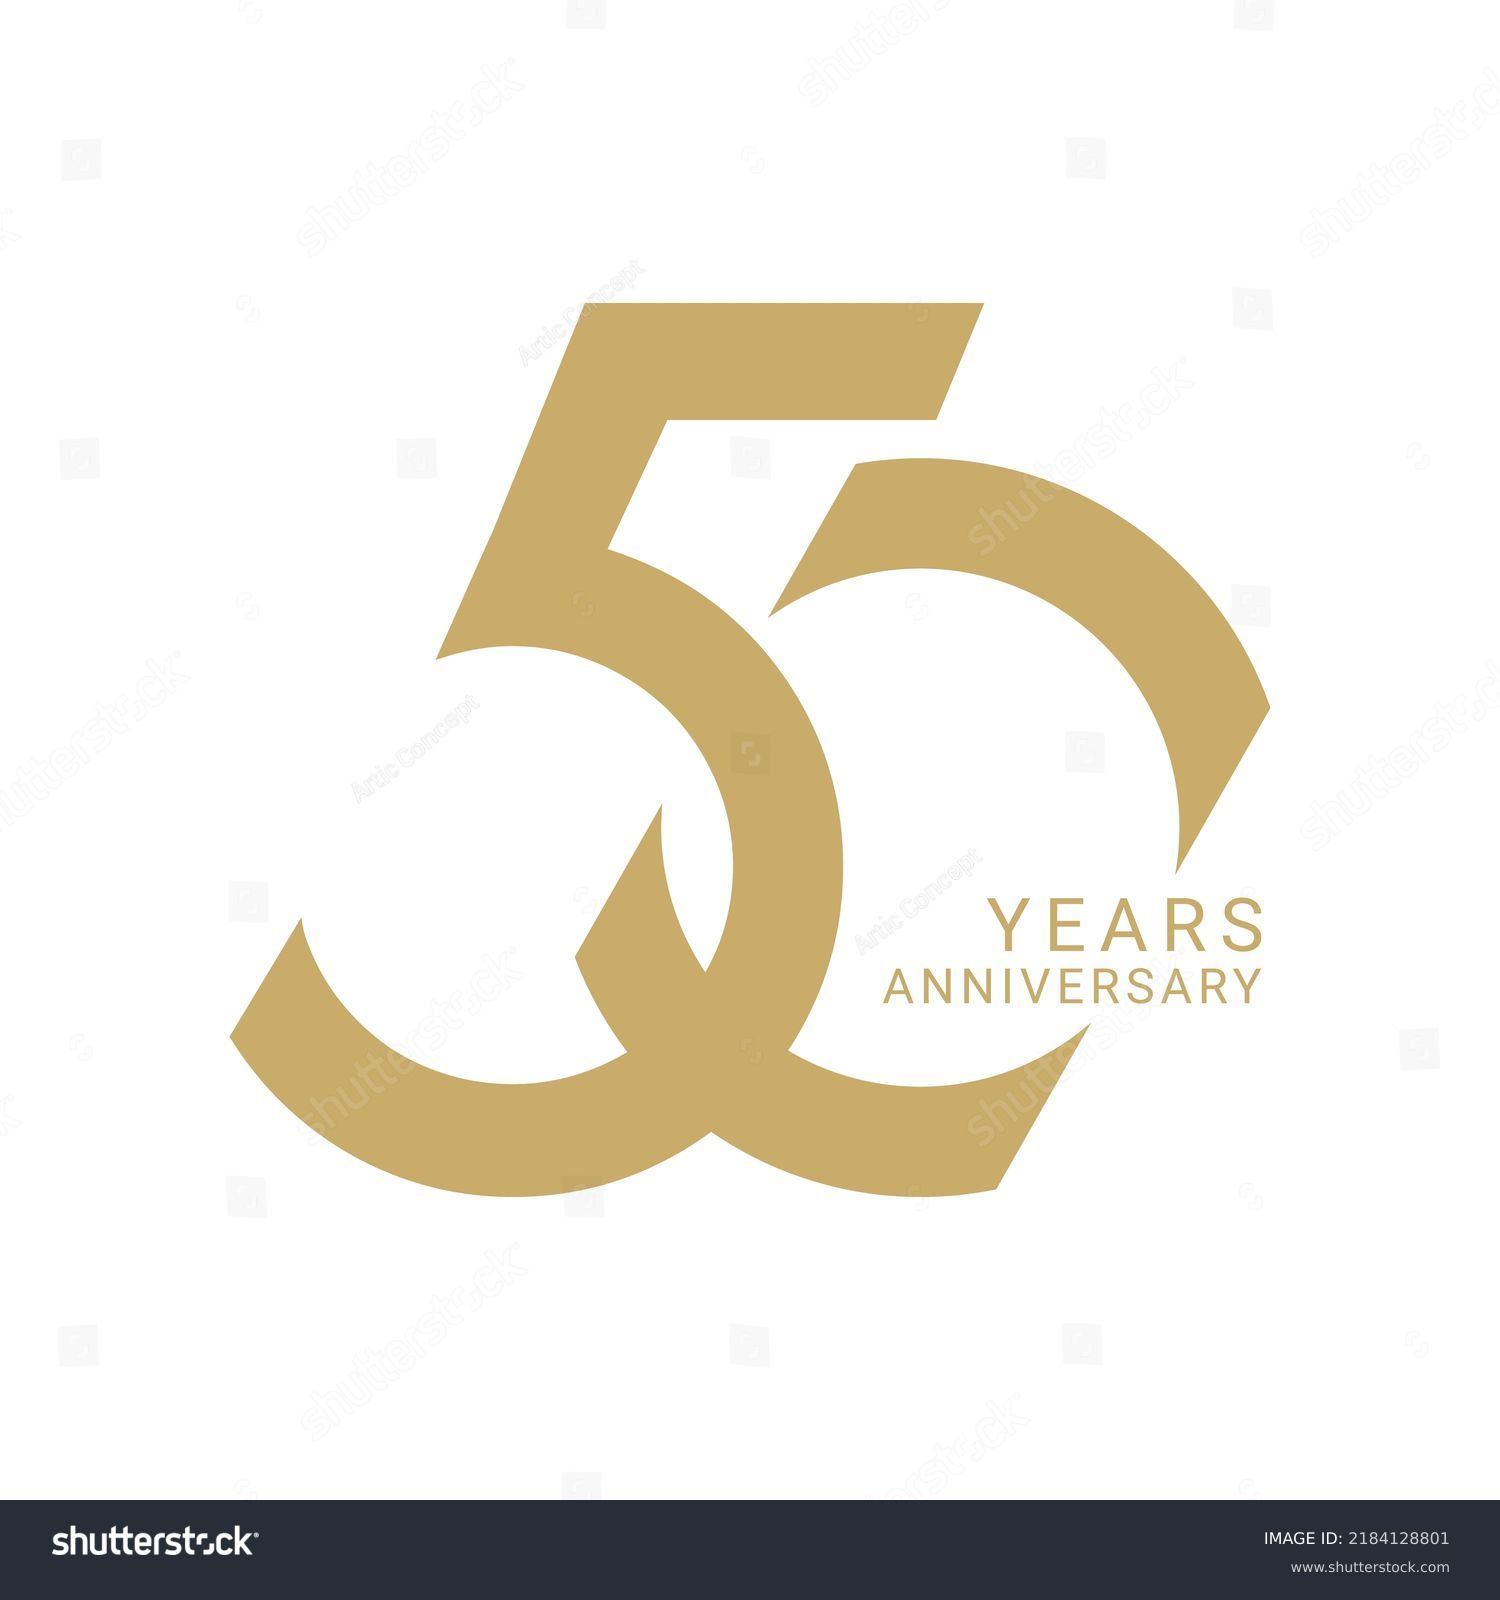 50 Year Anniversary Logo Golden Color Stock Vector (Royalty Free ...